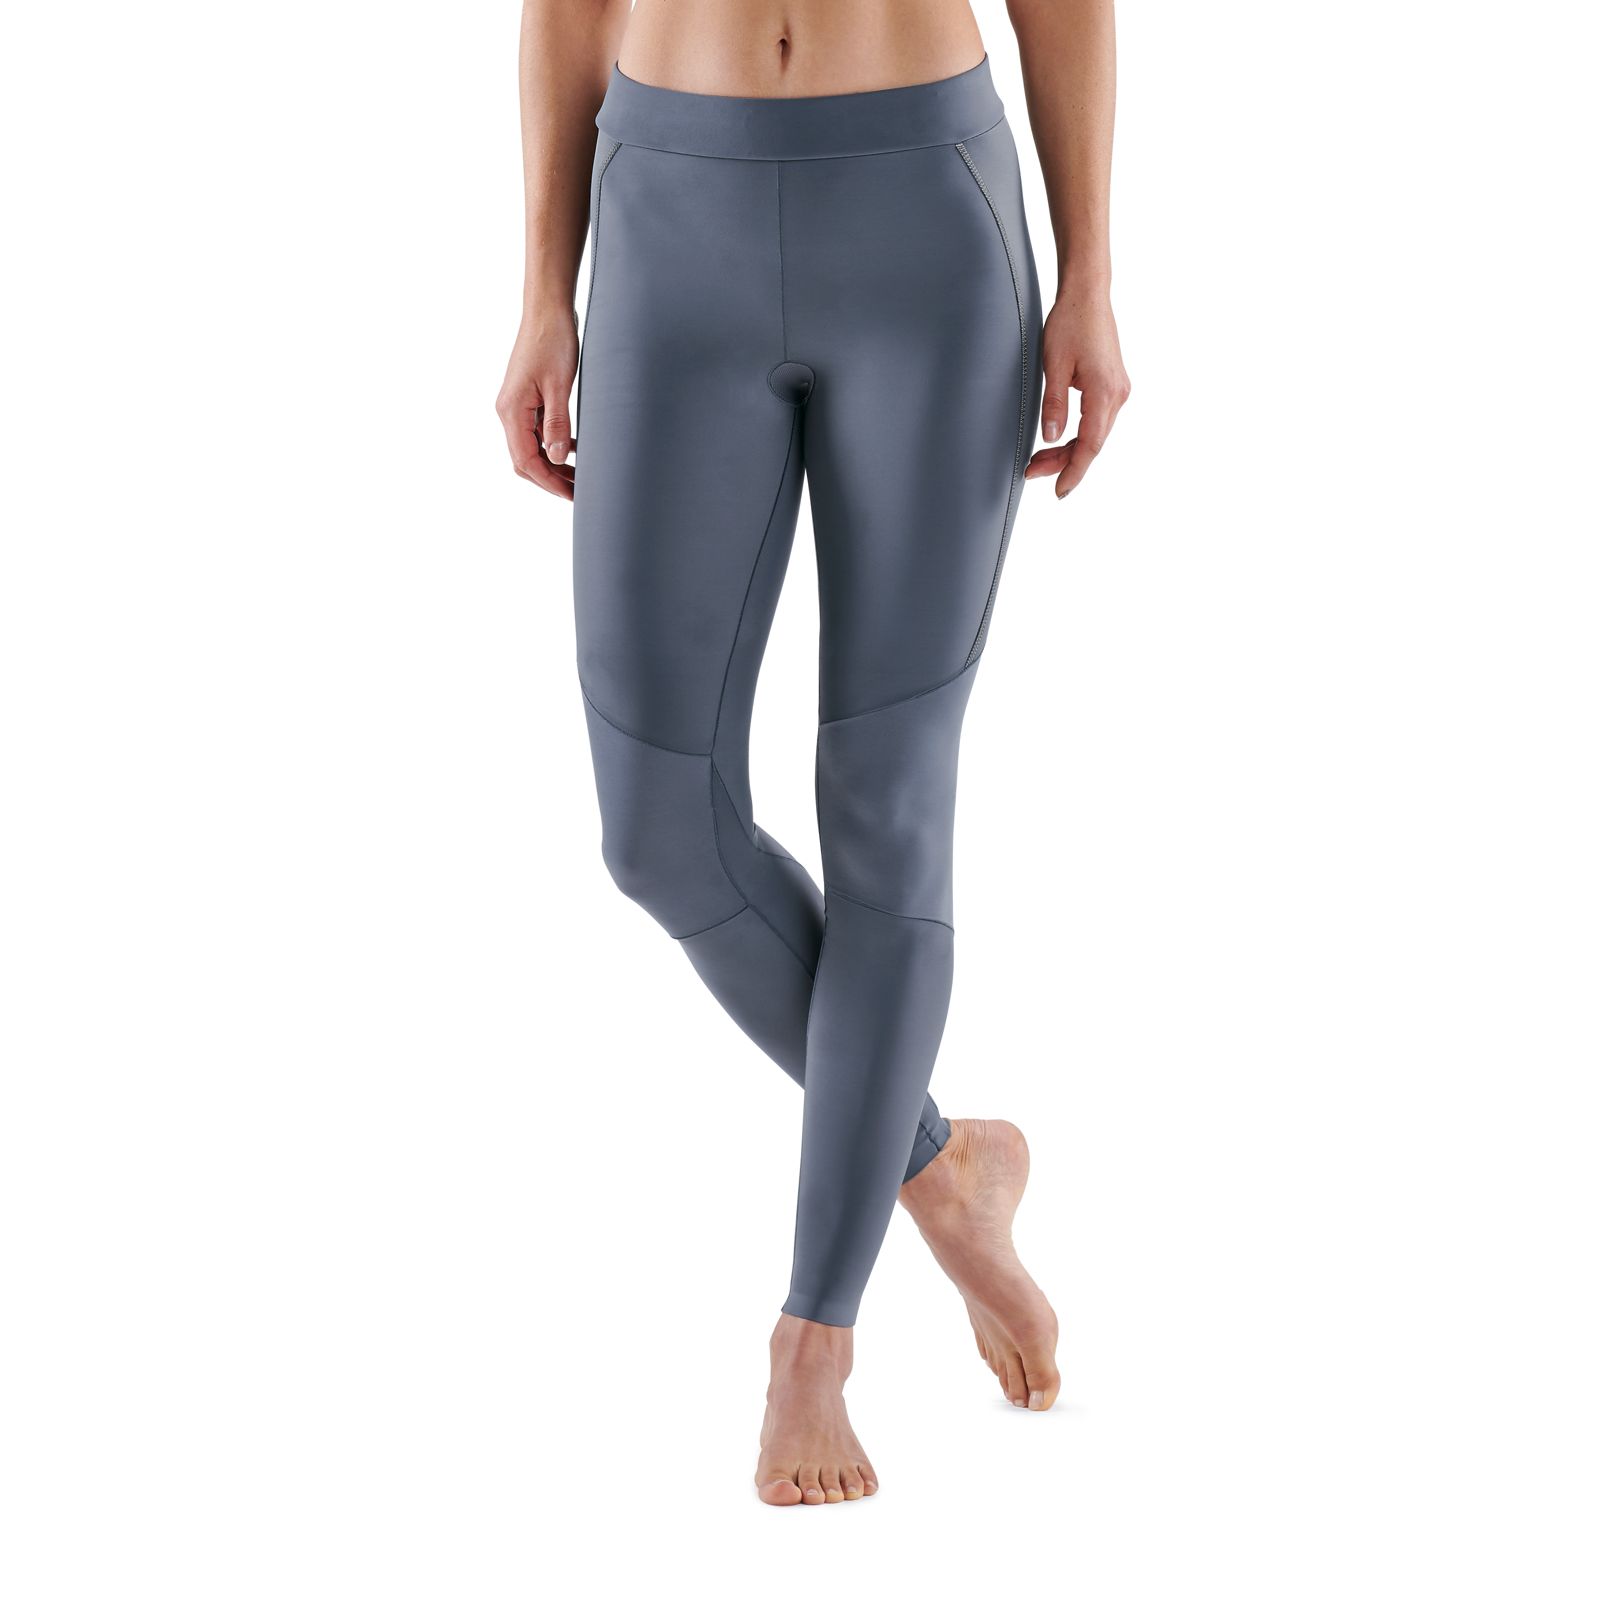 SKINS SERIES-5 WOMEN'S LONG TIGHTS CHARCOAL - SKINS Compression USA